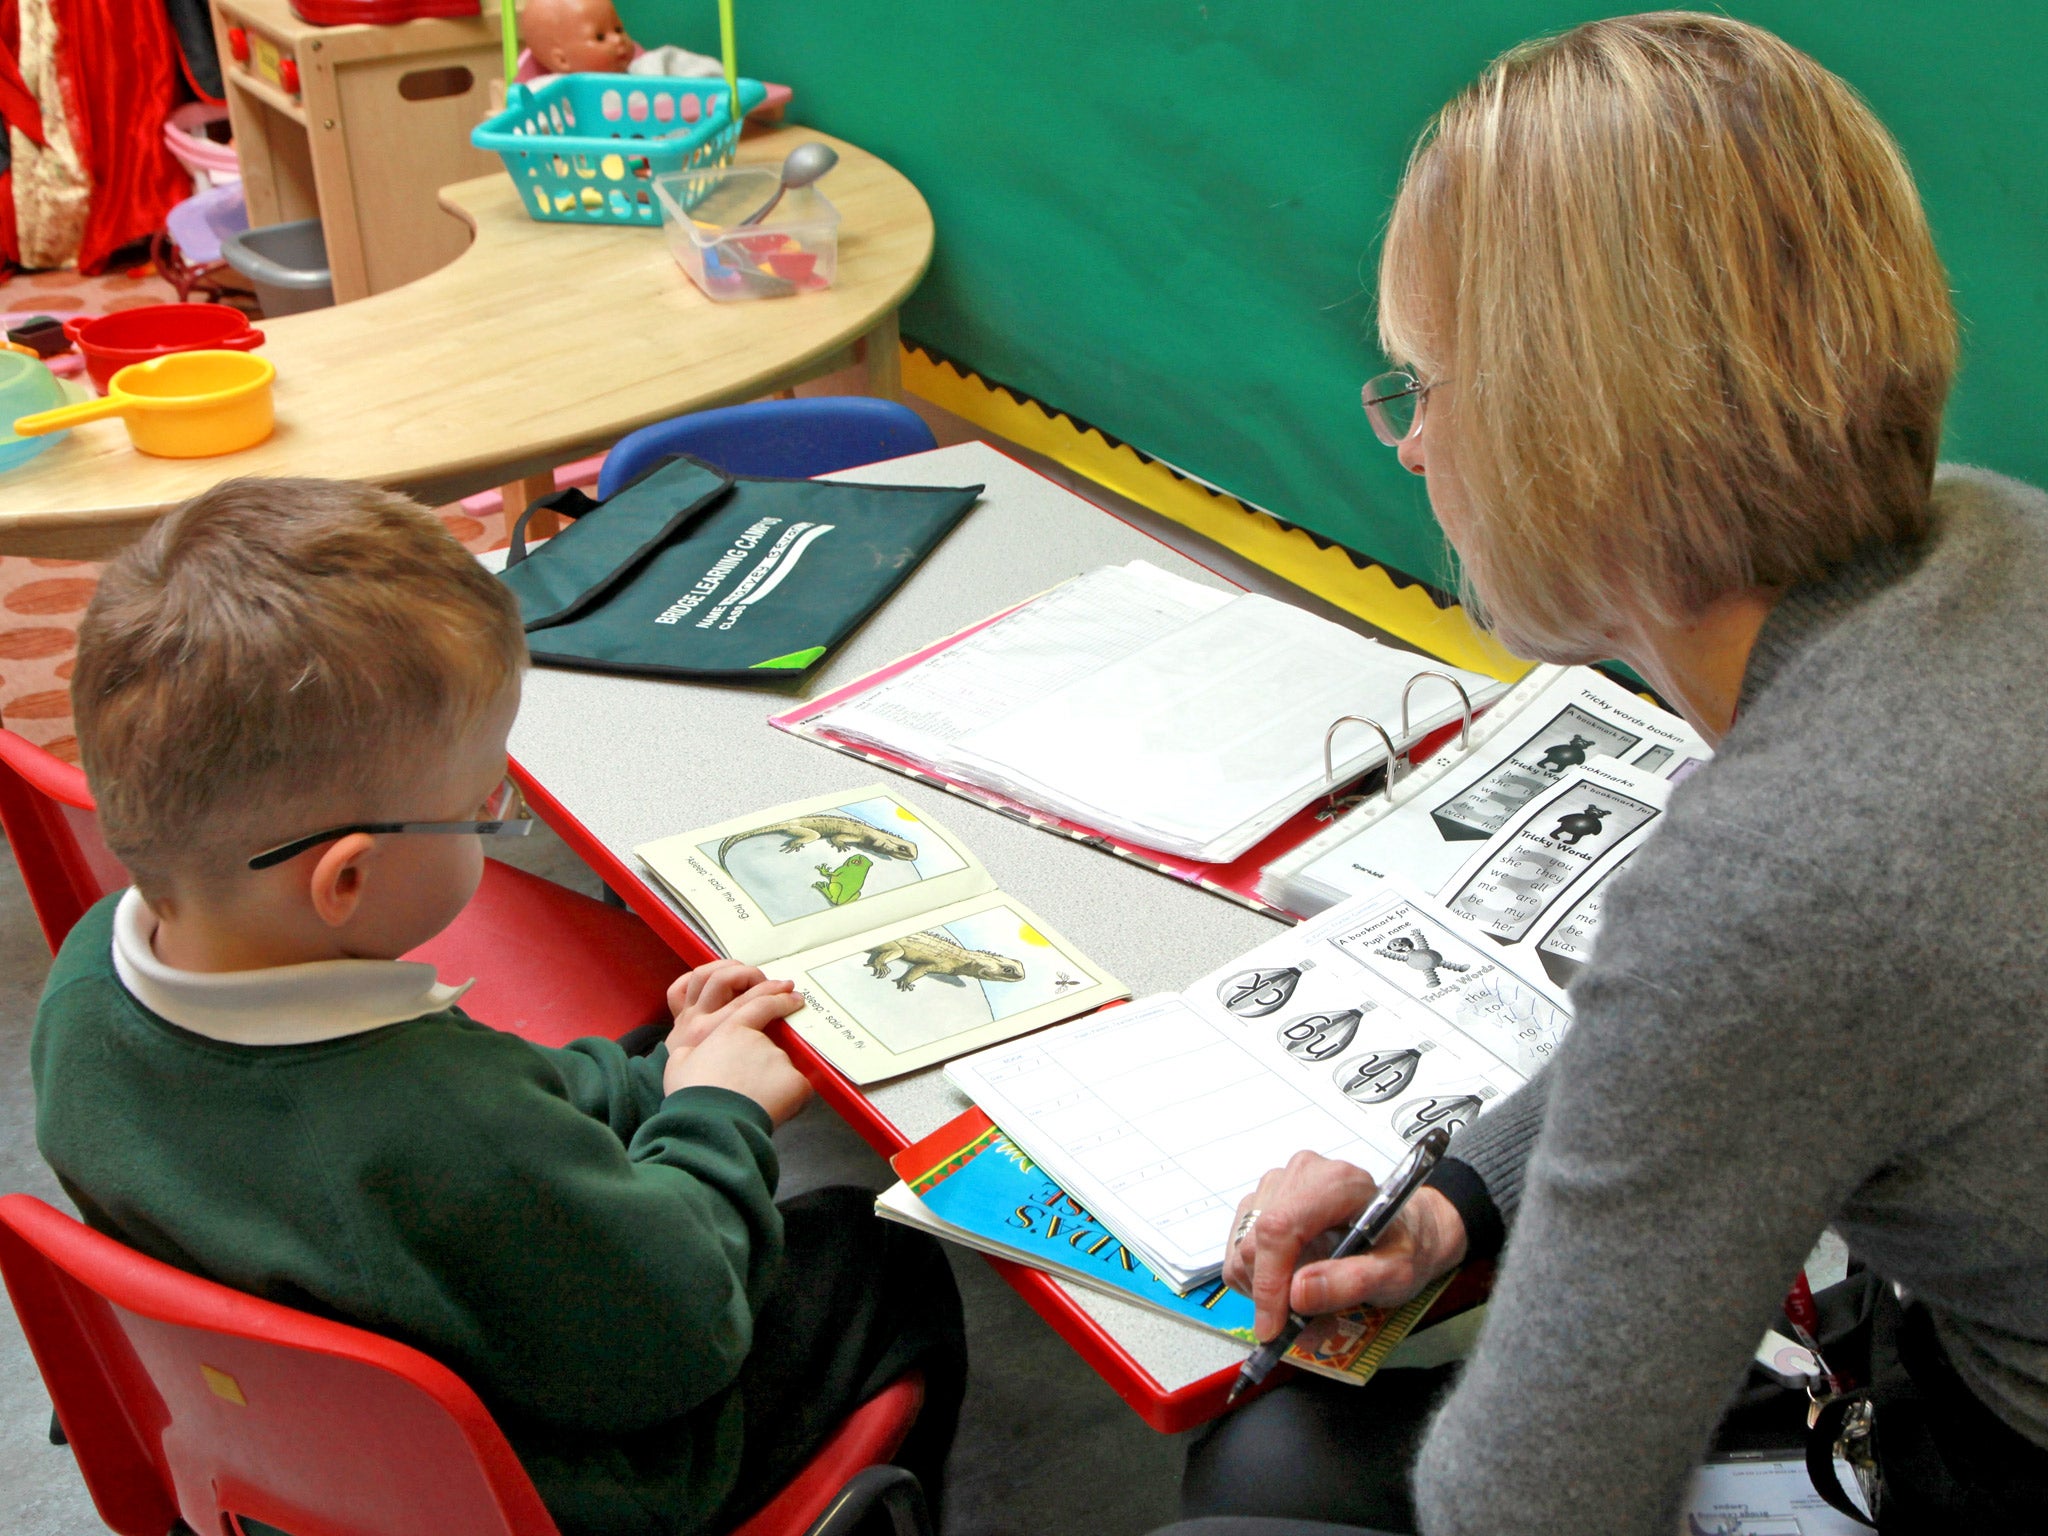 Primary schools will be expected to get 85 per cent of pupils to reach the required standard in English and maths